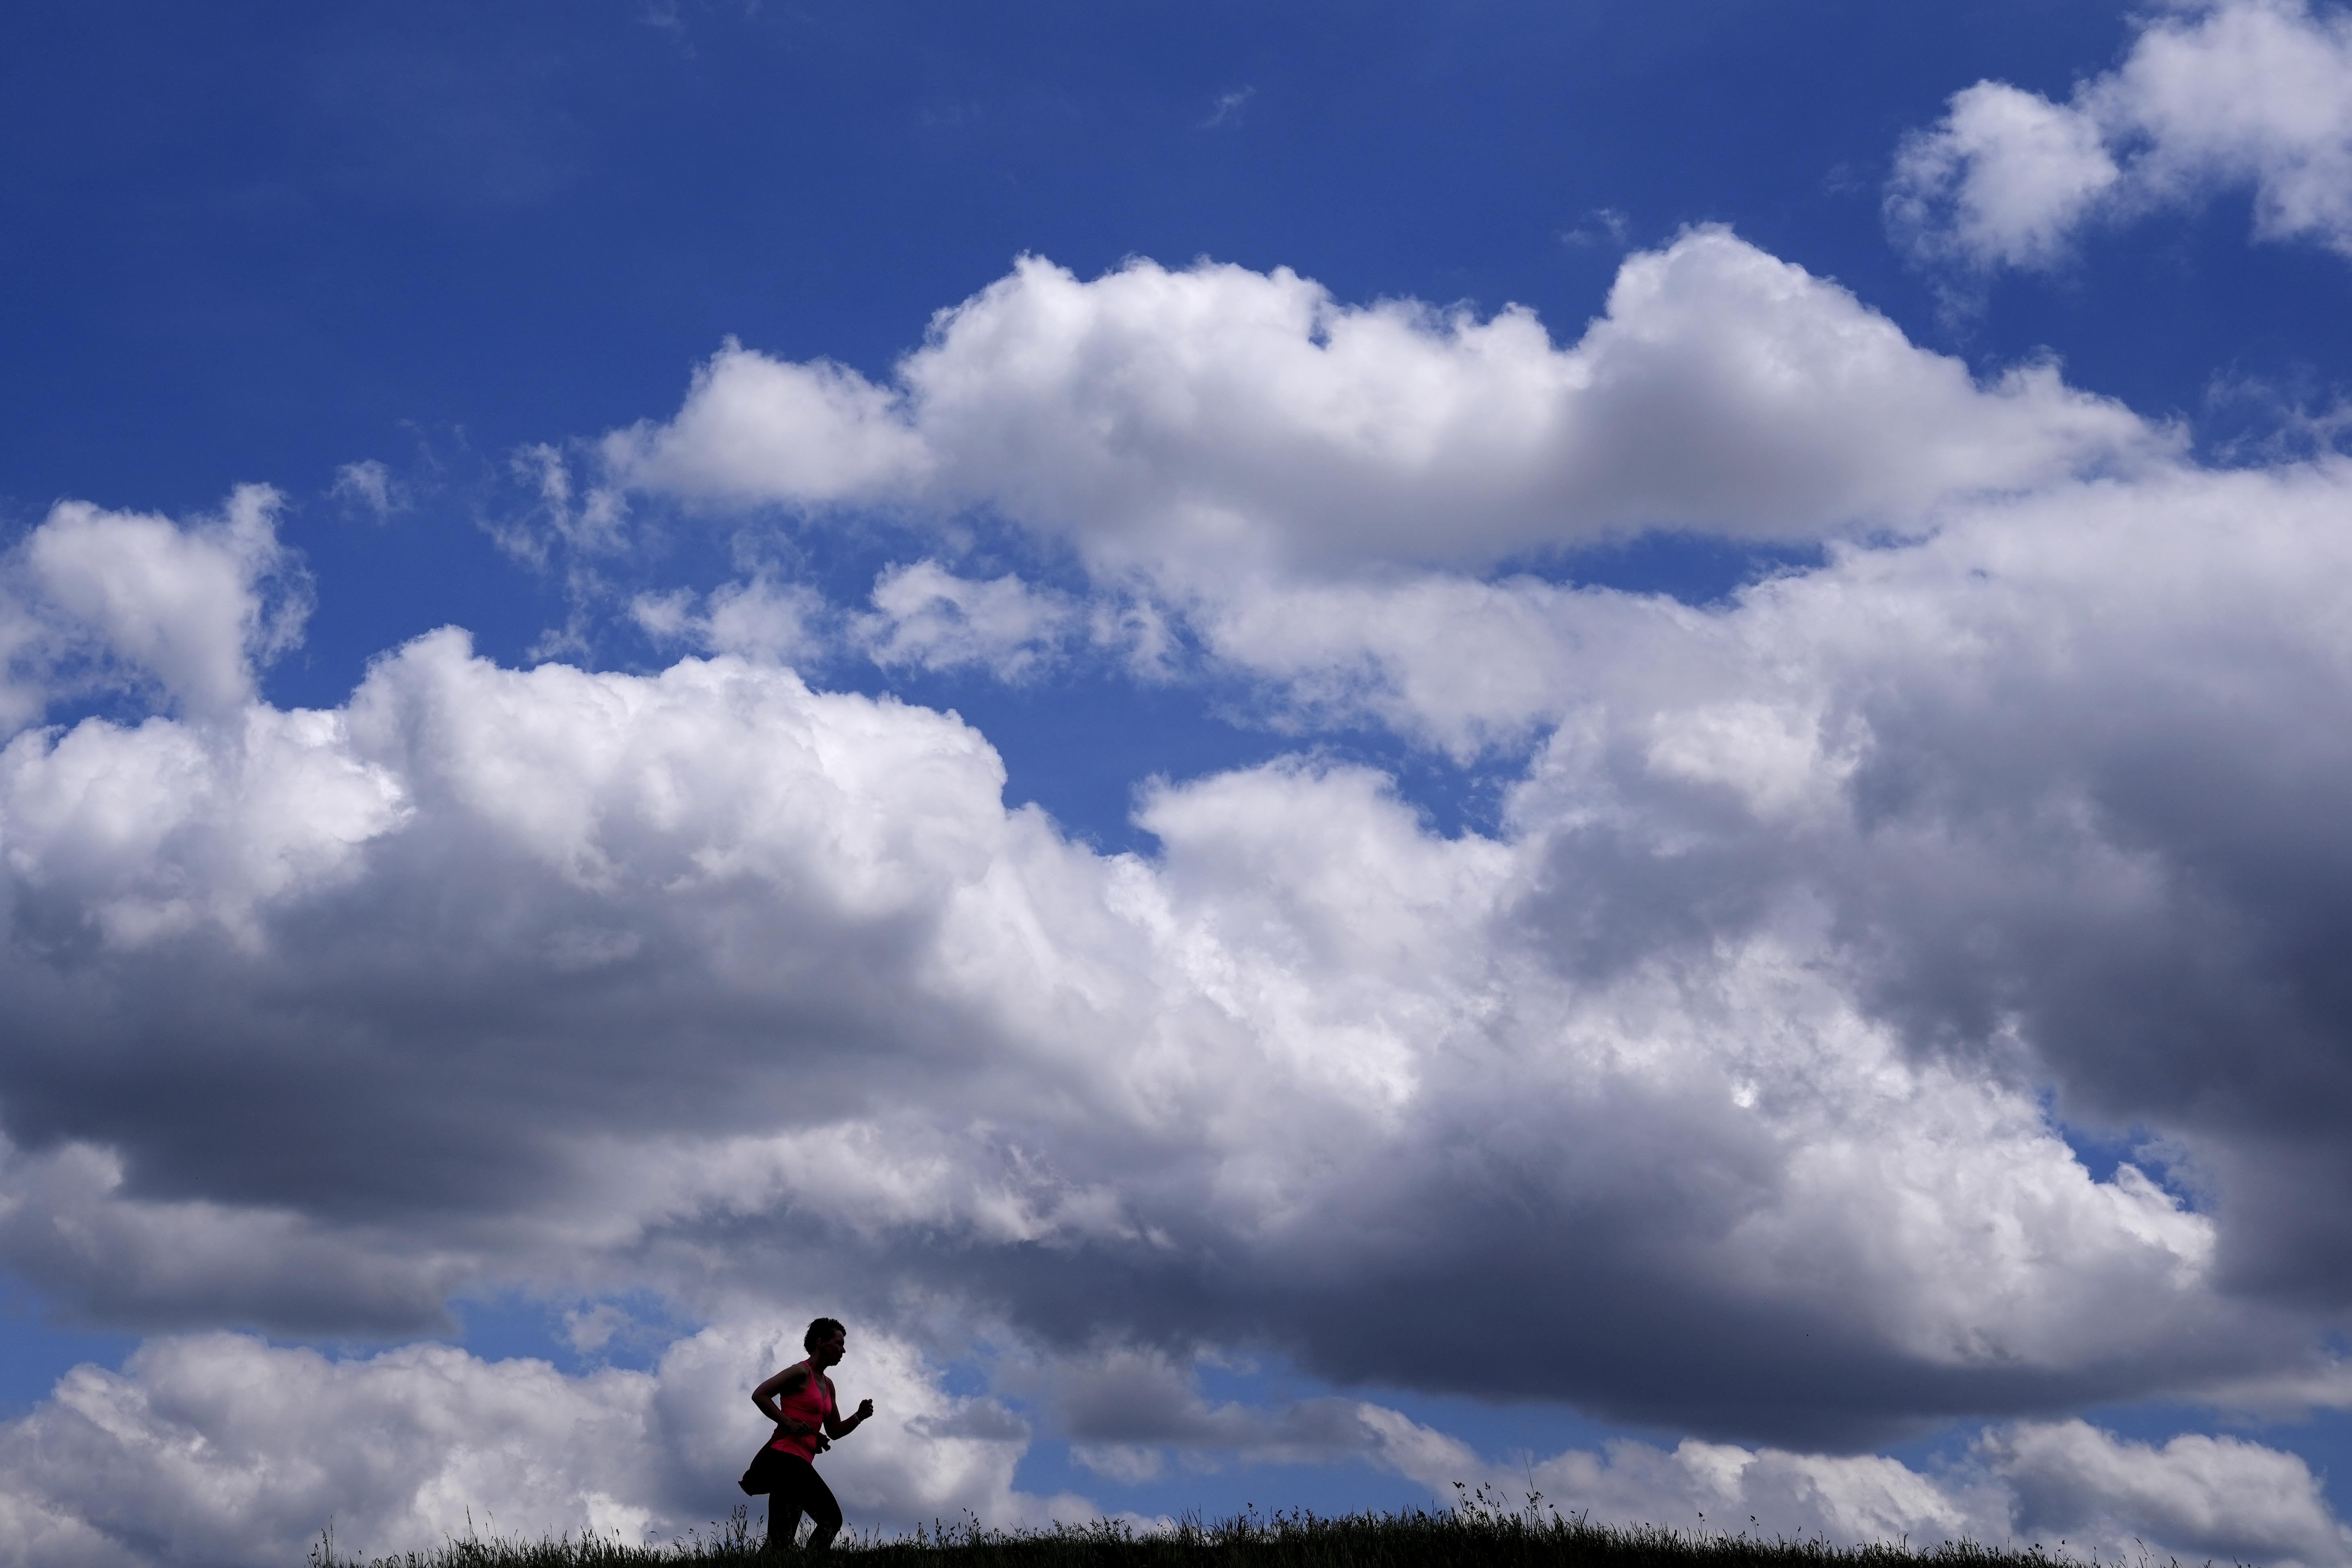 A woman jogs under a cloudy sky in Munich, Germany, Friday, May 27, 2022. (AP Photo/Matthias Schrader)